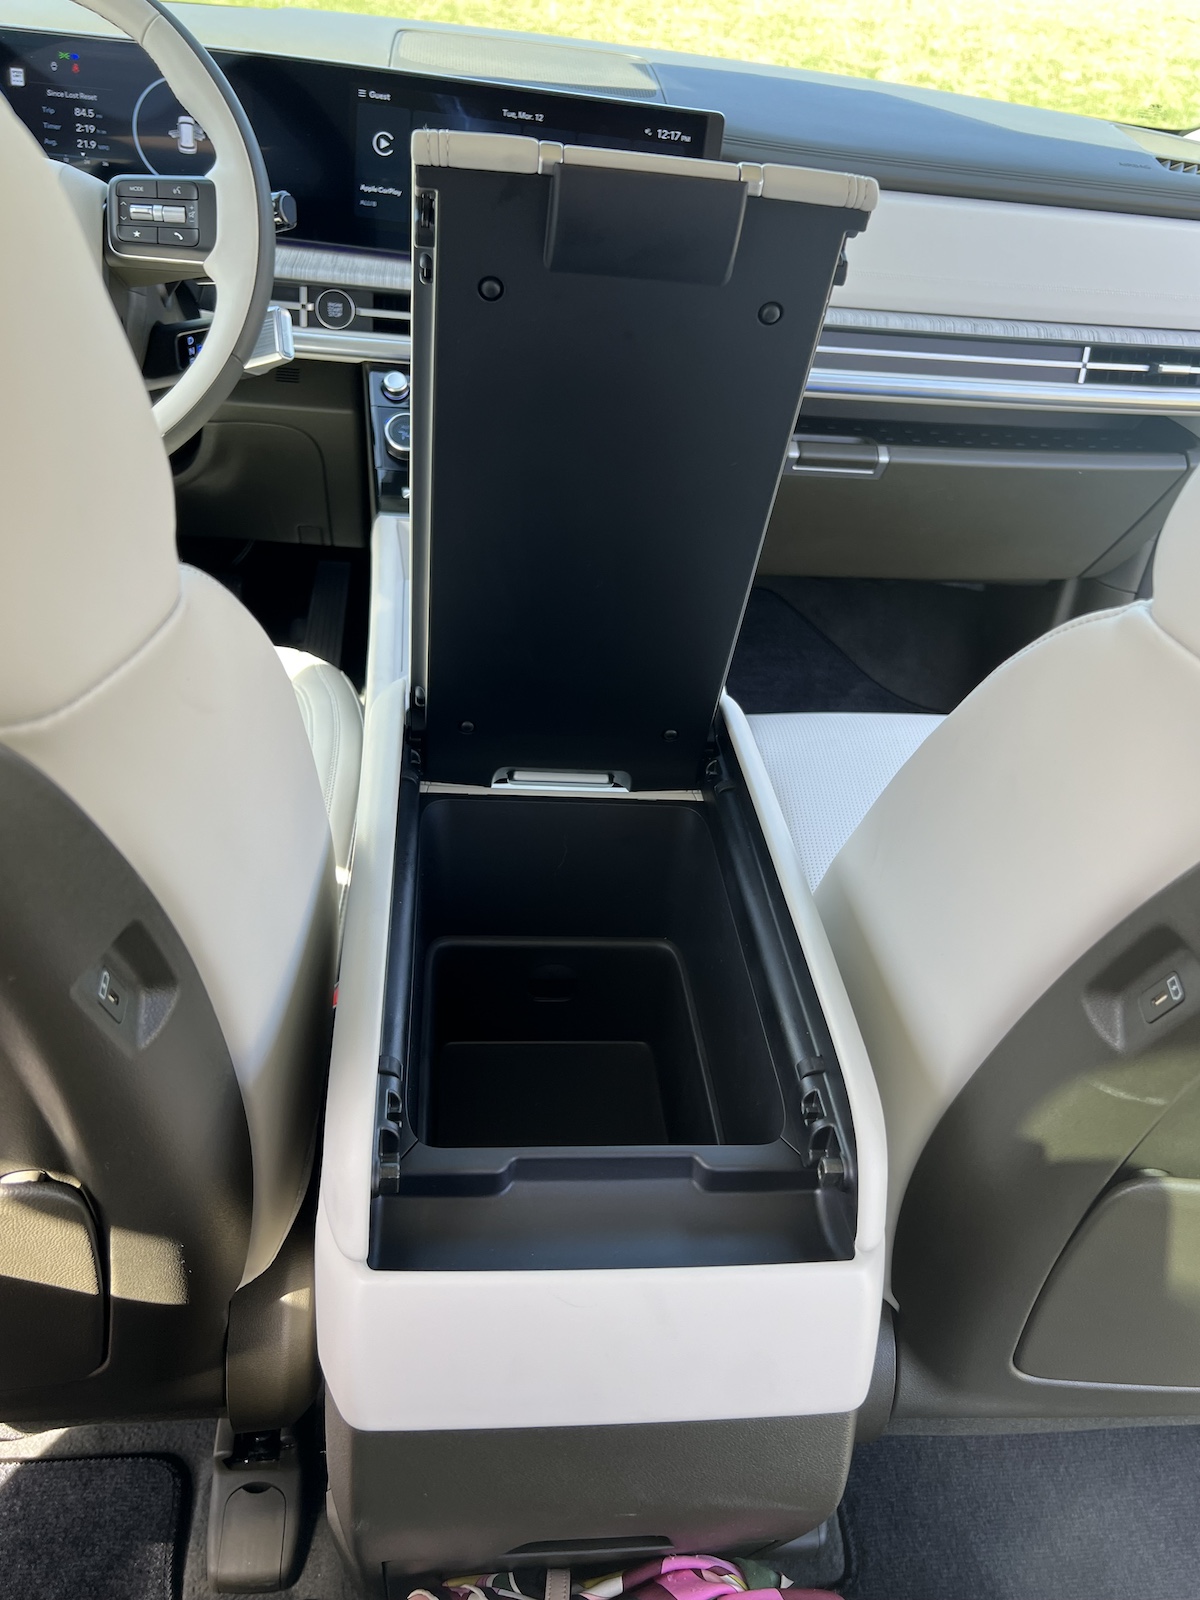 The Center Arm Rest Opens To The Rear Seat So Passengers Can Access It, Too